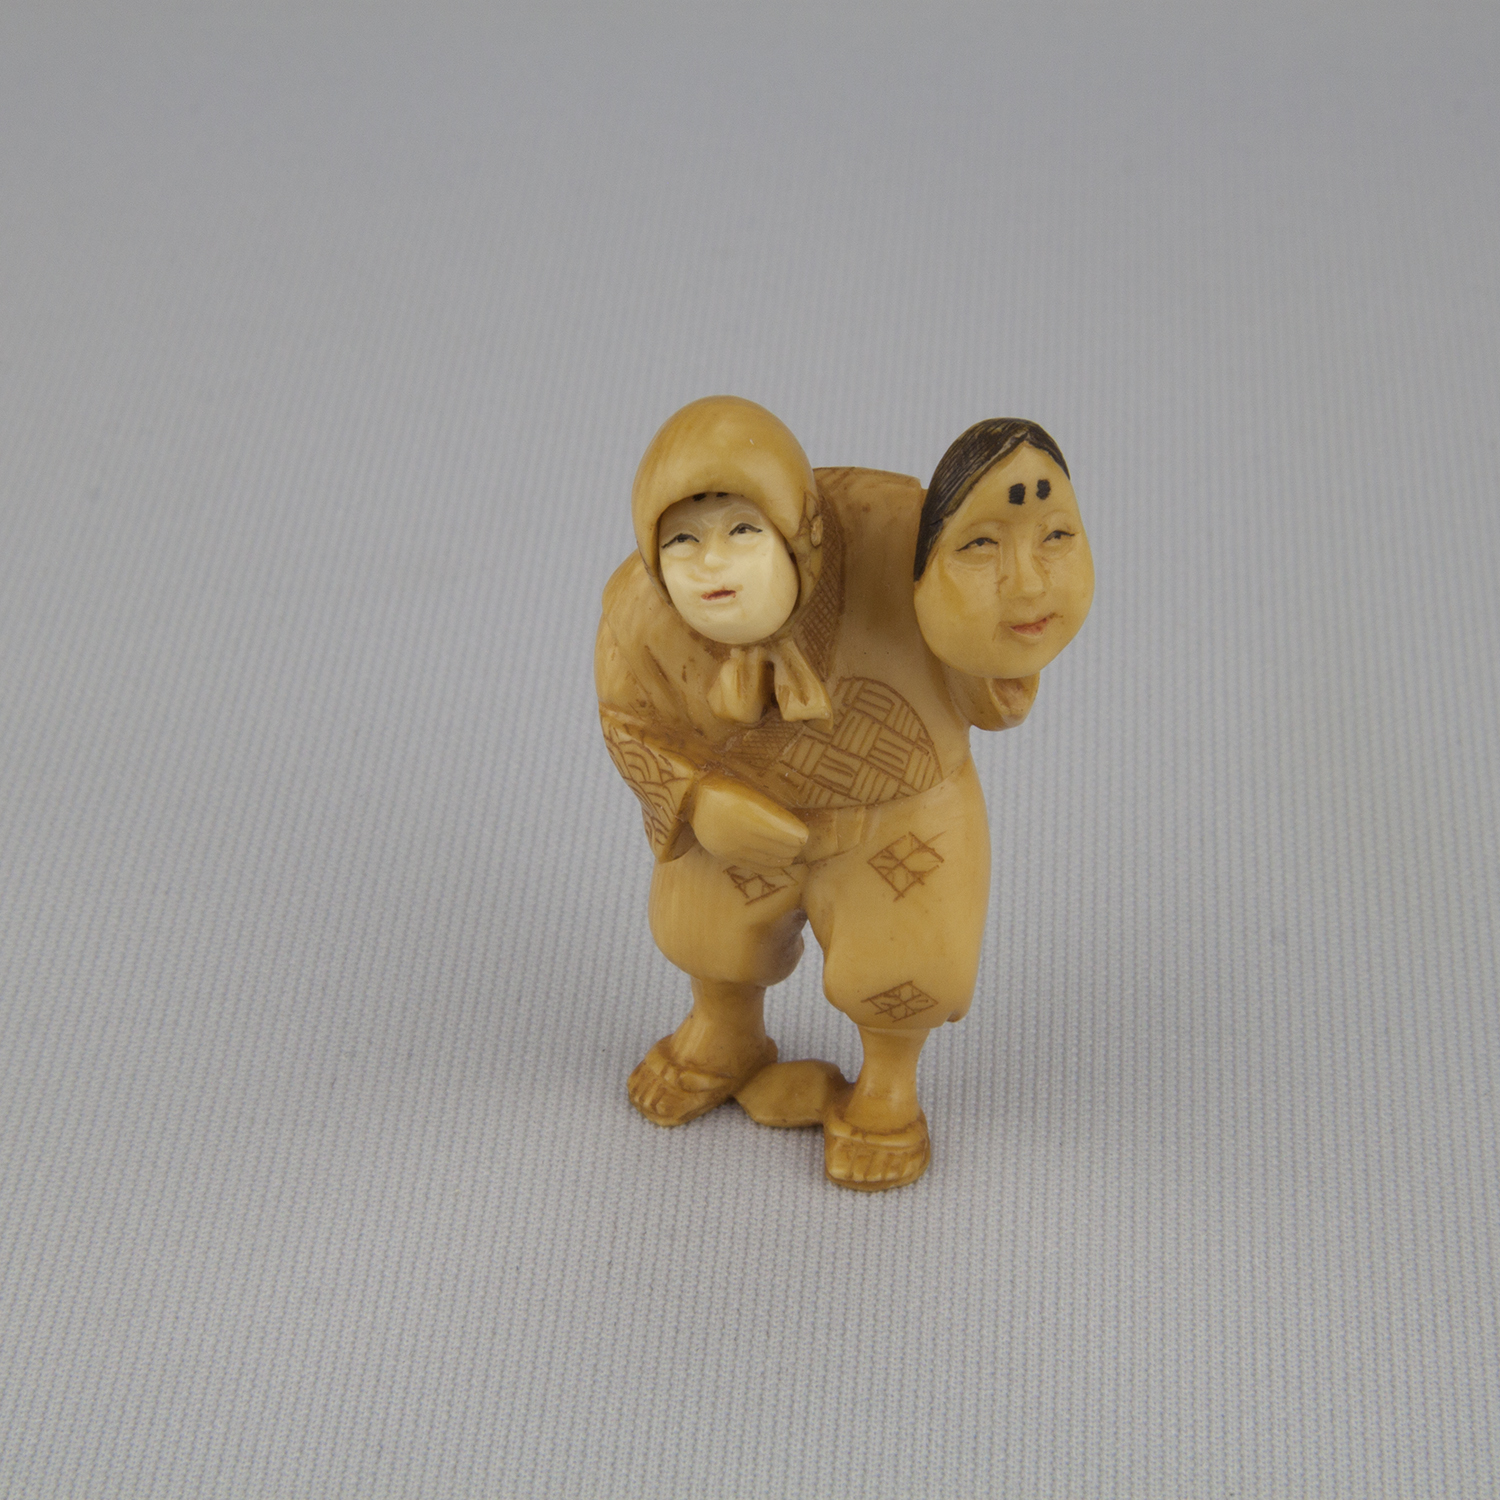 Netsuke depicting standing man with rotating face, holding an Okame mask, ca. 18th–19th century, ivory, The Herman D. Doochin Collection, 1992.168